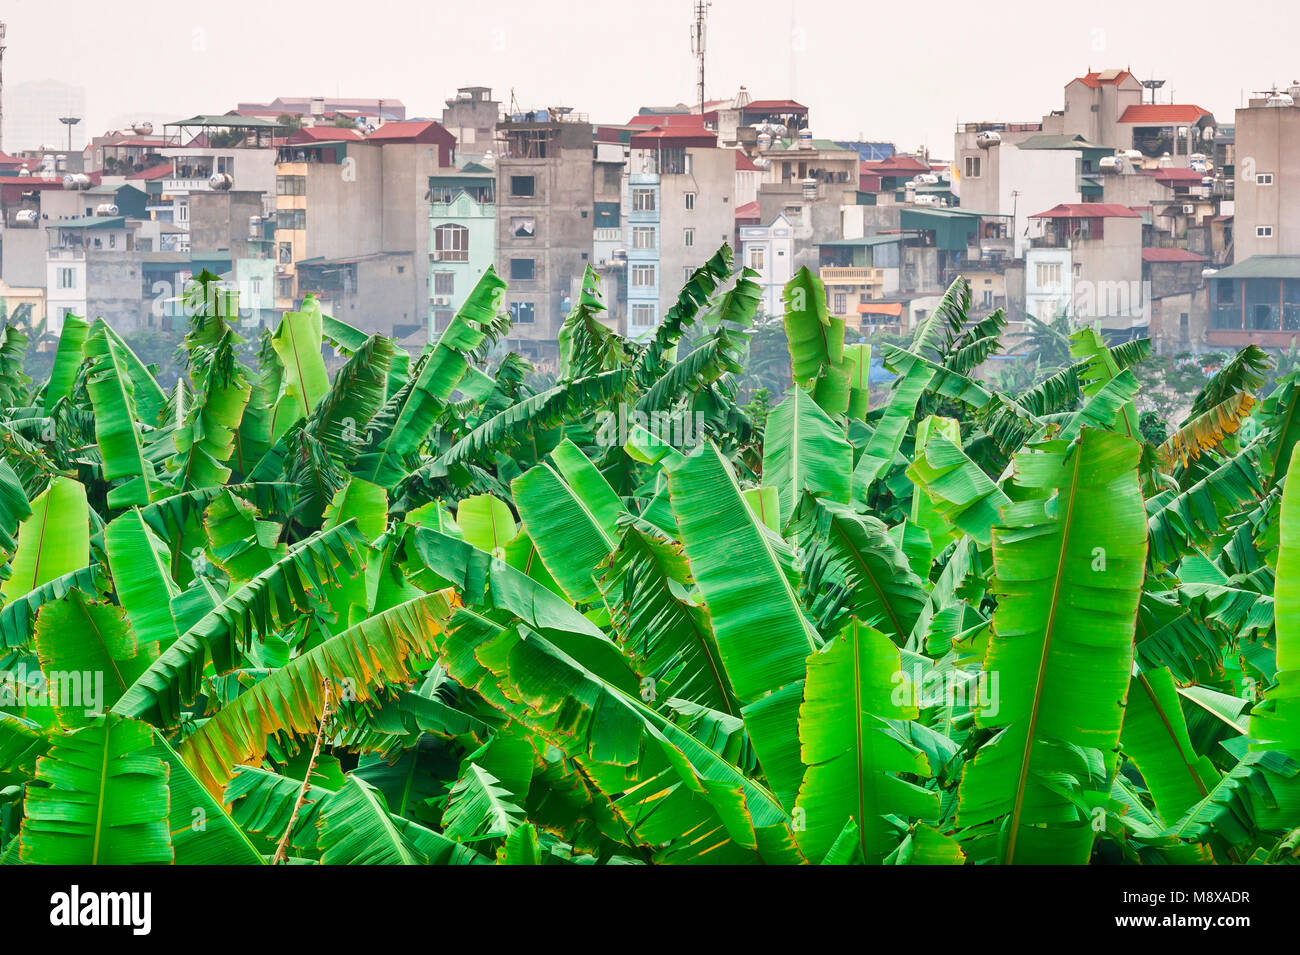 Hanoi skyline, a dense cluster of palm trees viewed against the skyline of narrow houses typical of the architecture of Hanoi, Vietnam Stock Photo